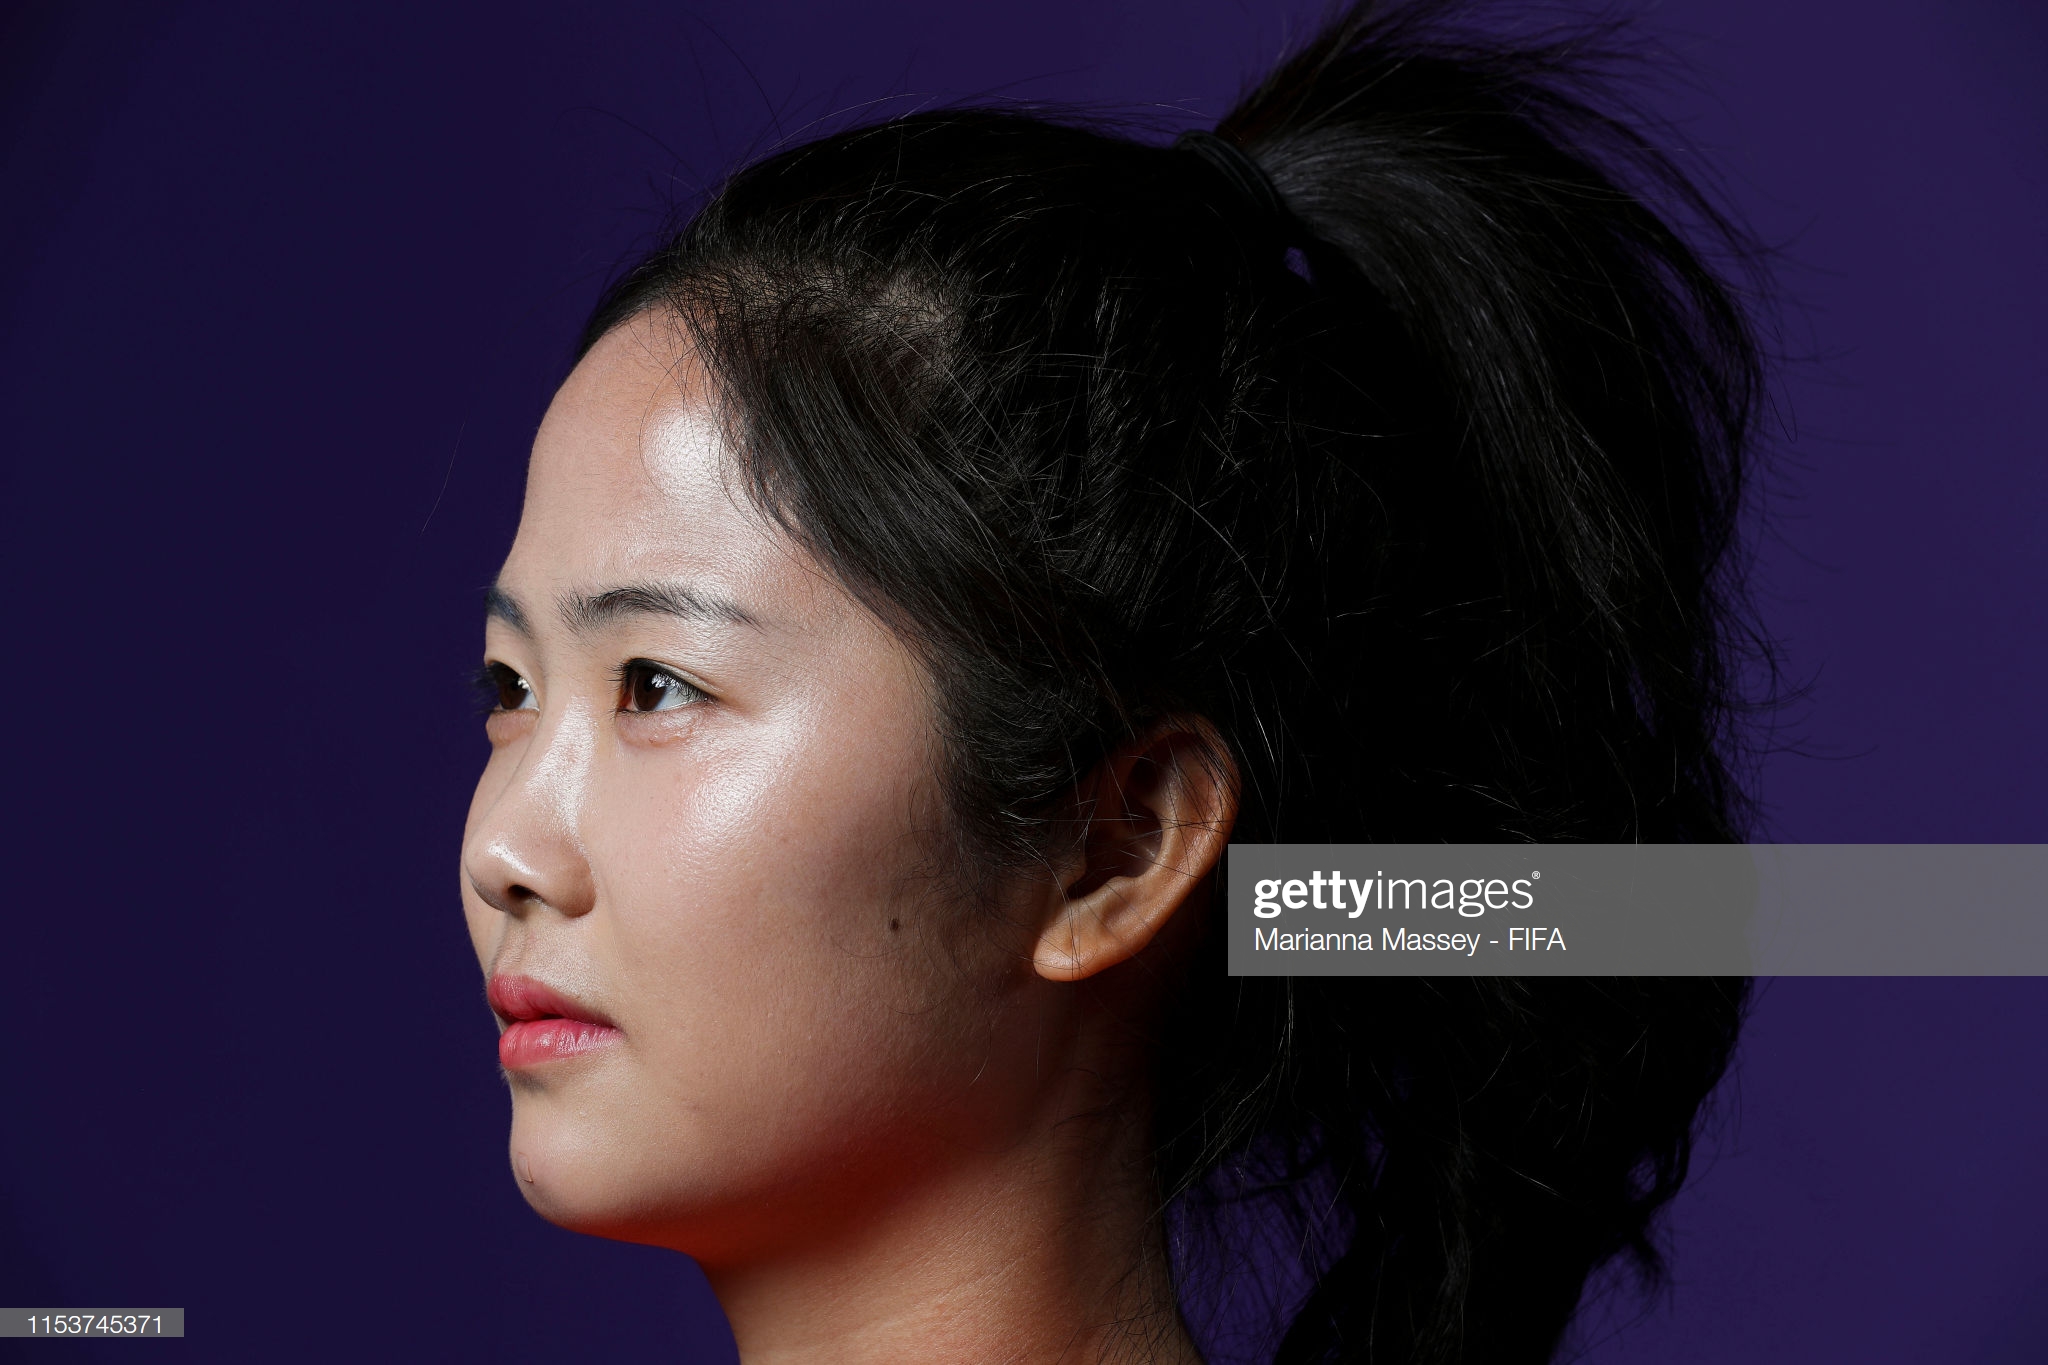 gettyimages-1153745371-2048x2048.jpg